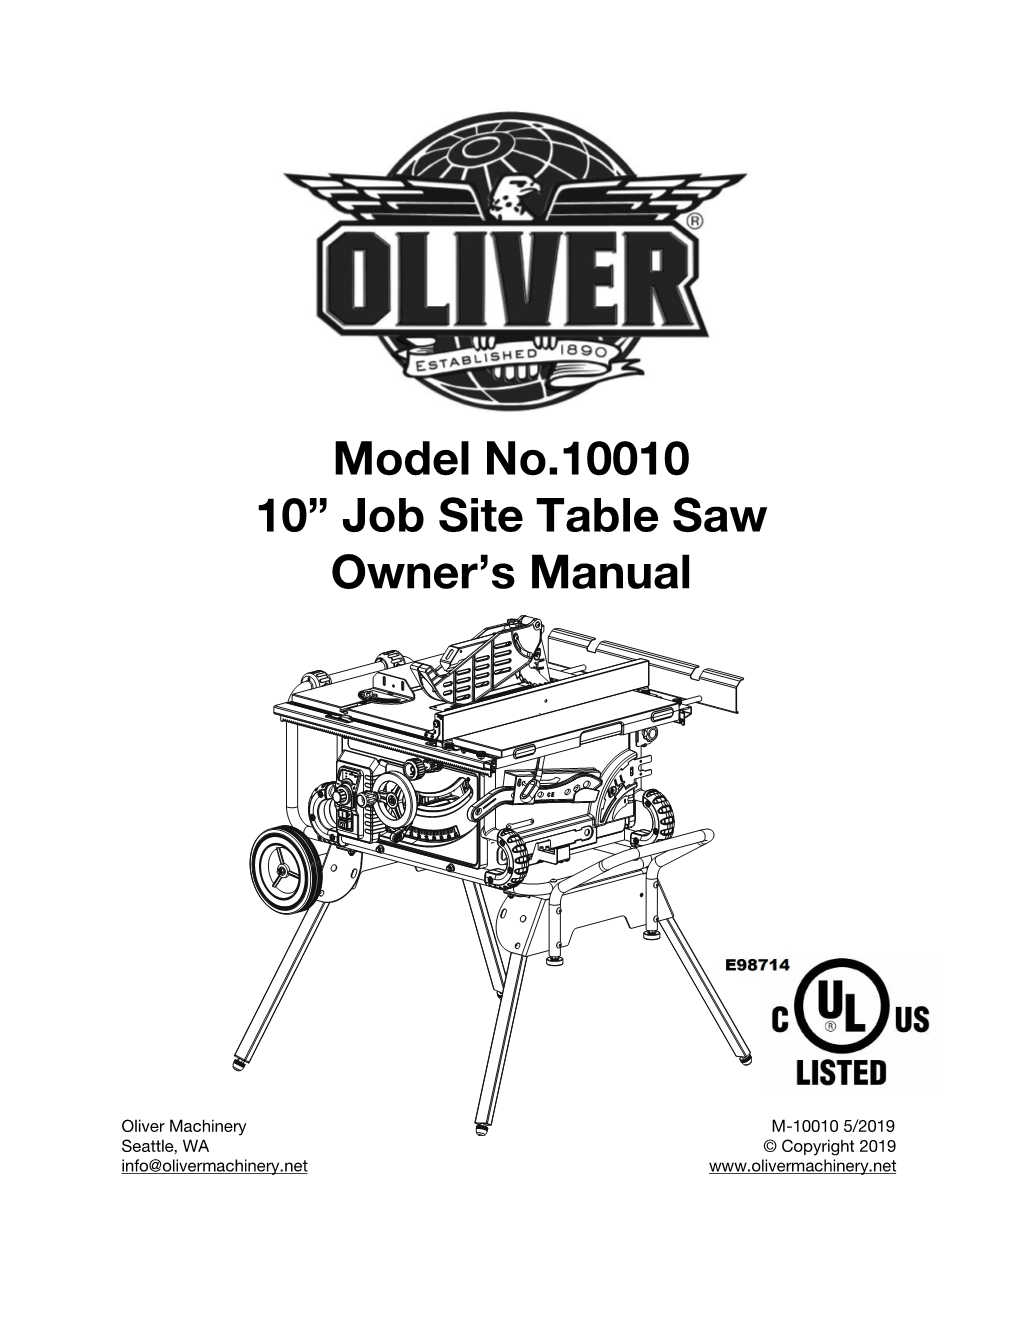 Model No.10010 10” Job Site Table Saw Owner's Manual